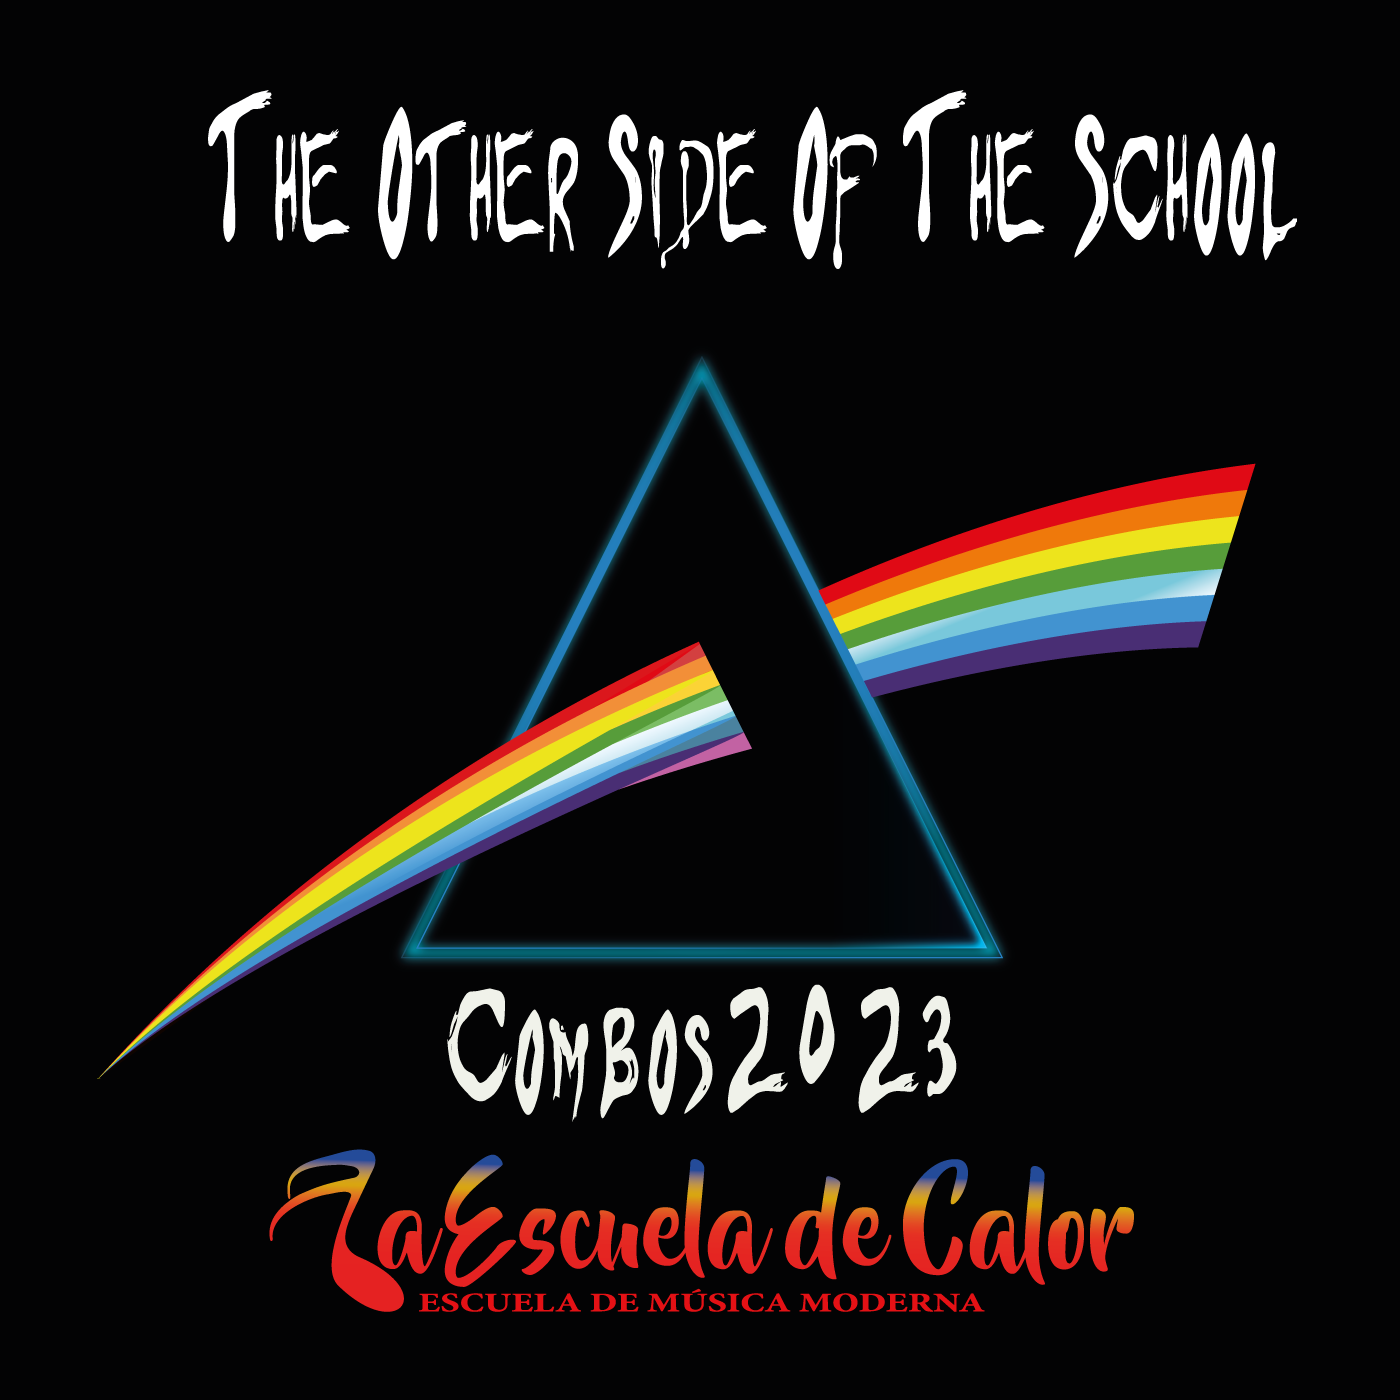 Portada disco Combos 2023 "The Other Side Of The School"